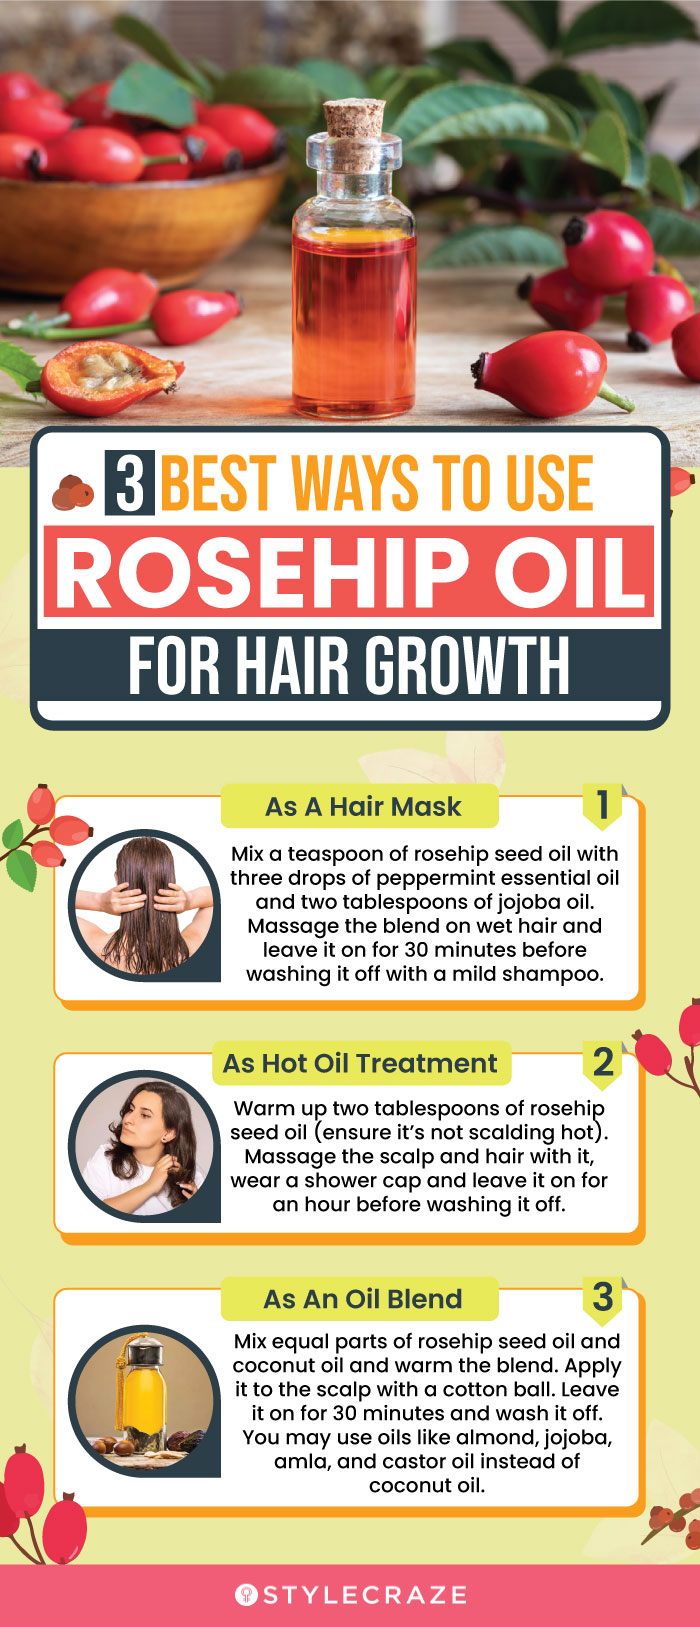 4 Benefits Of Oiling Your Hair That Shampooing Conditioning Cannot Provide